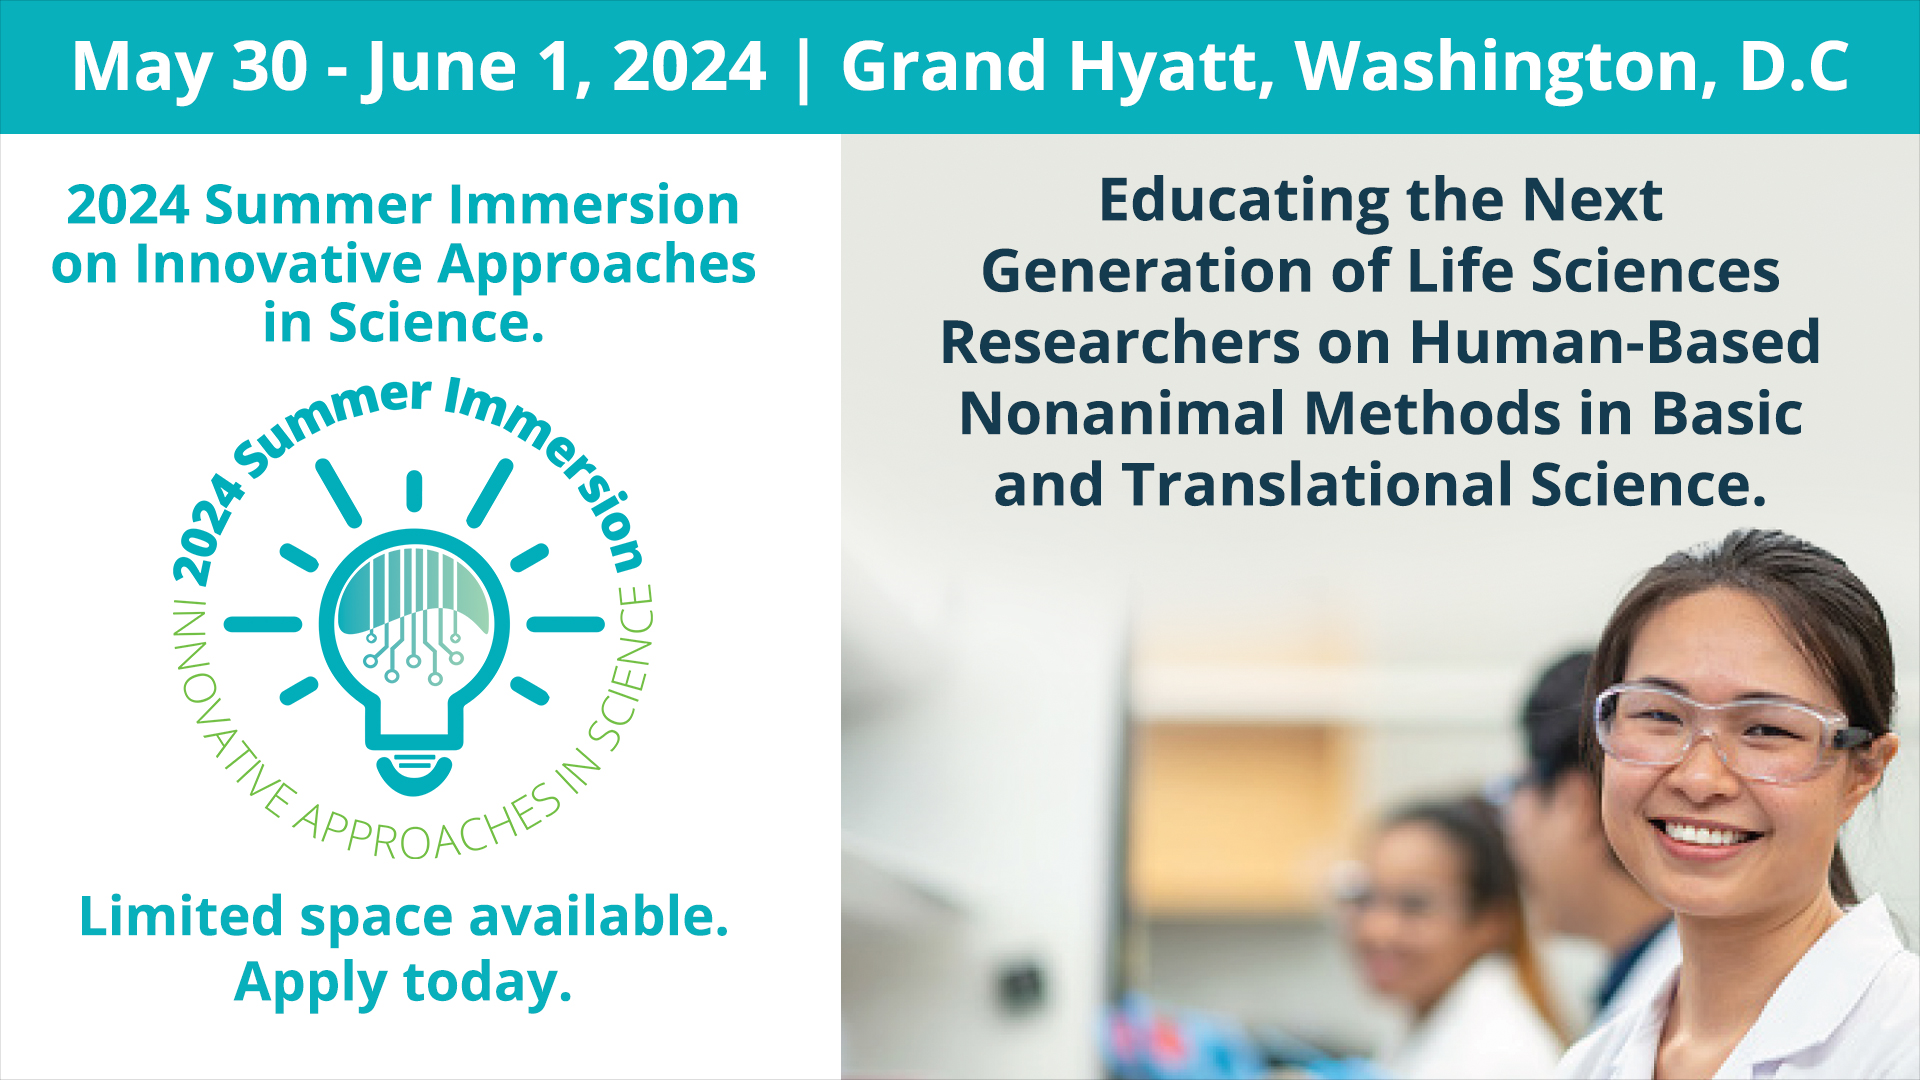  2024 Summer Immersion on Innovative Approaches in Science